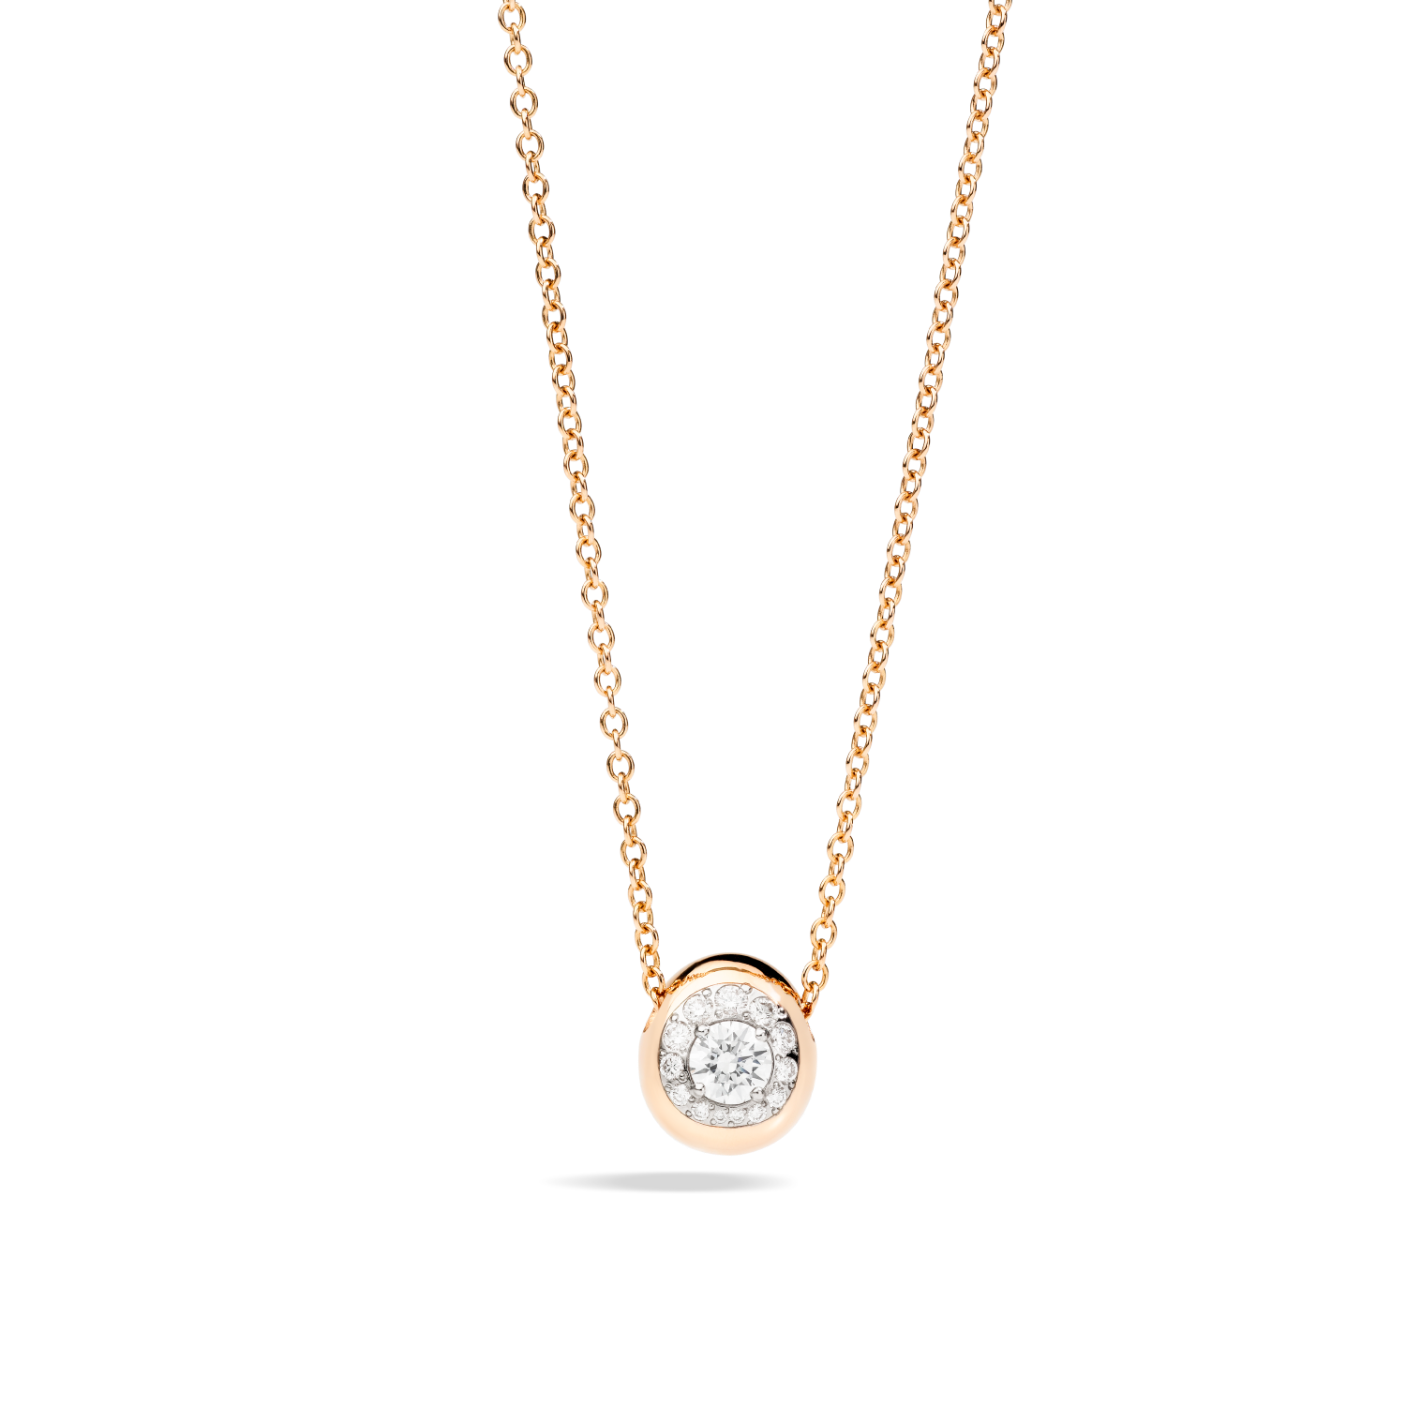 PCB8130_O7000_GW105_010_Pomellato_pendant-with-chainnuvola-rose-gold-18kt-diamond.png